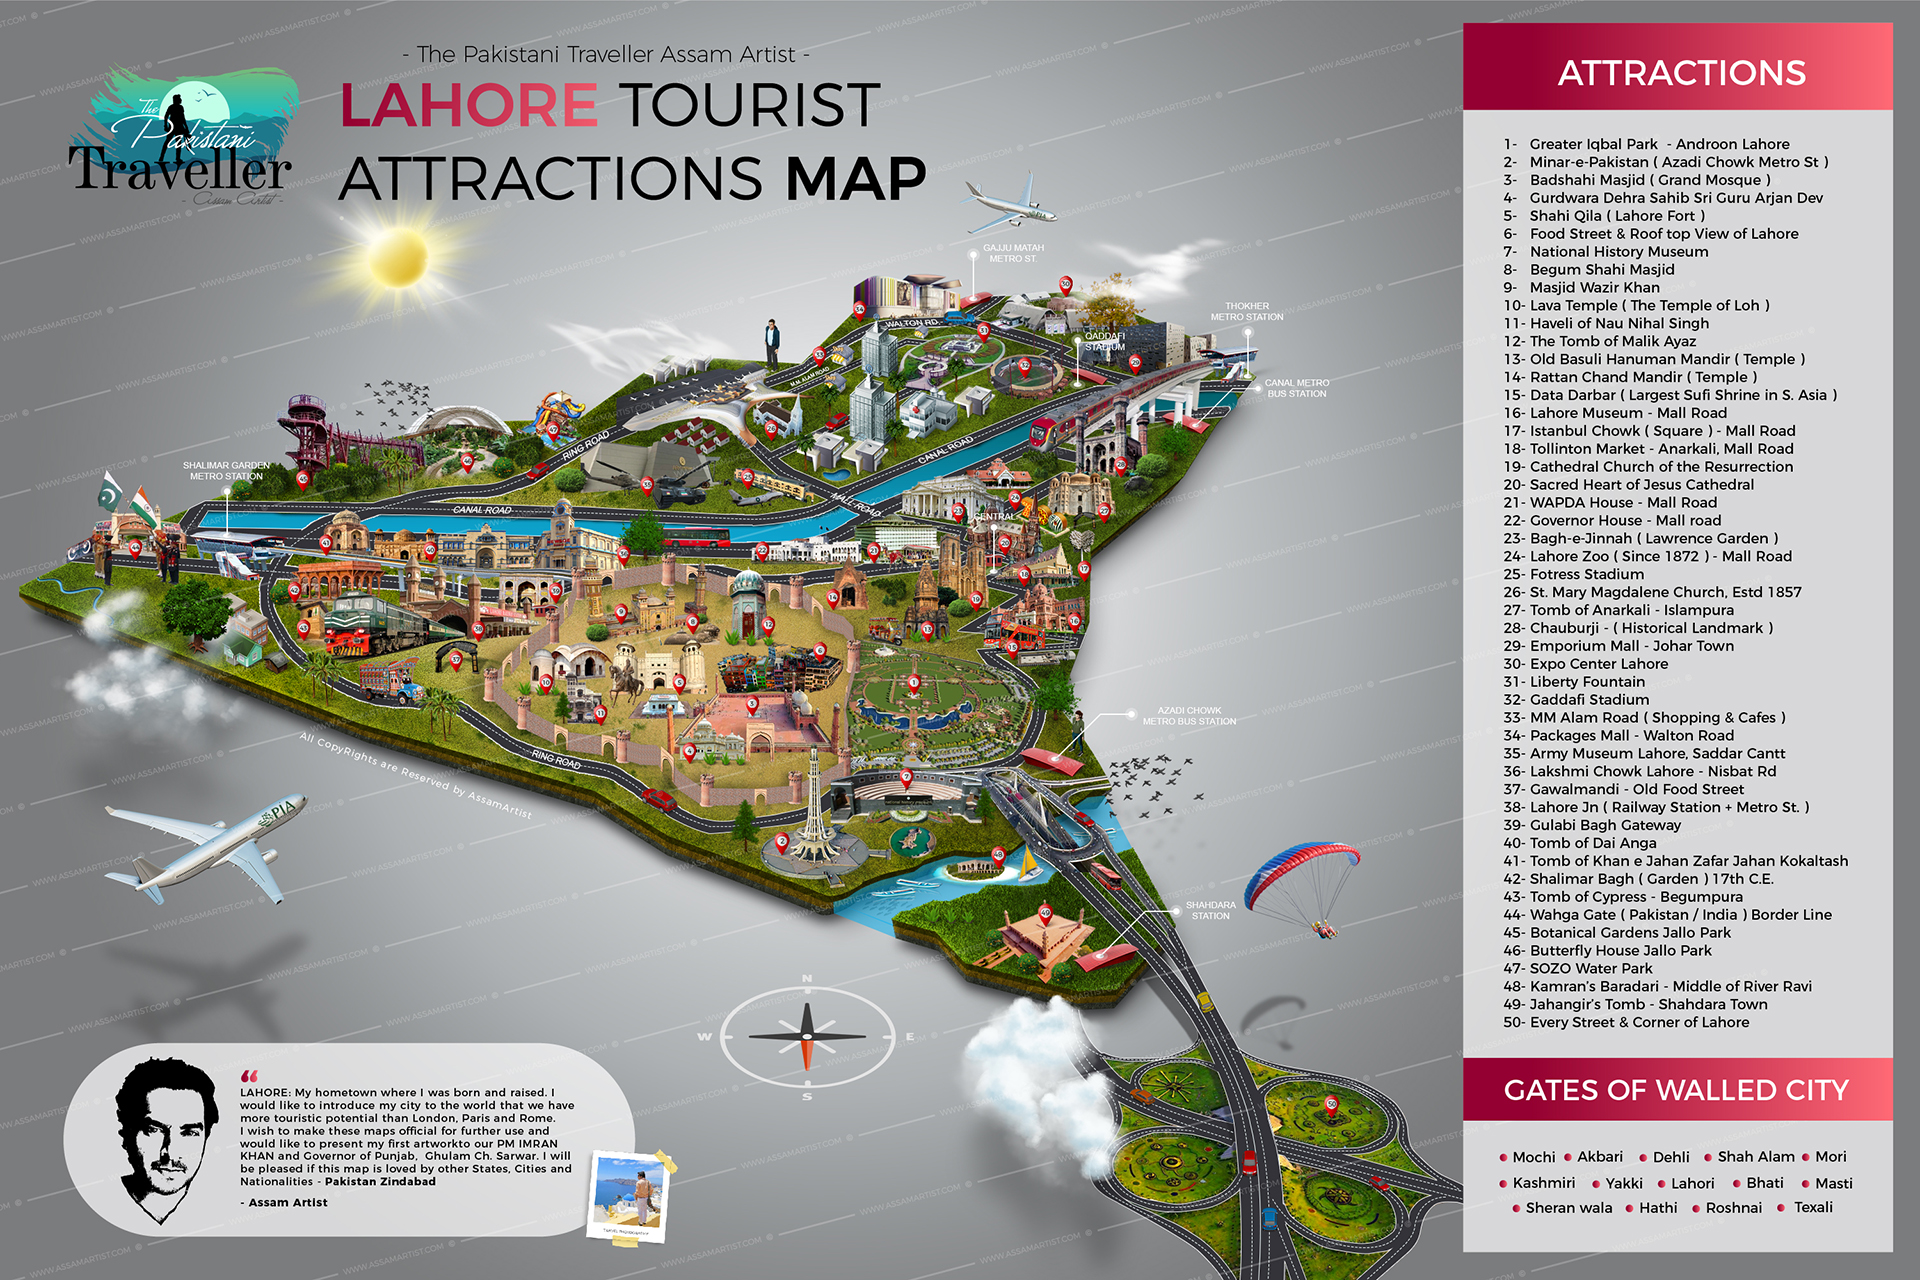 New Lahore Tourist Attractions Map by Assam Artist